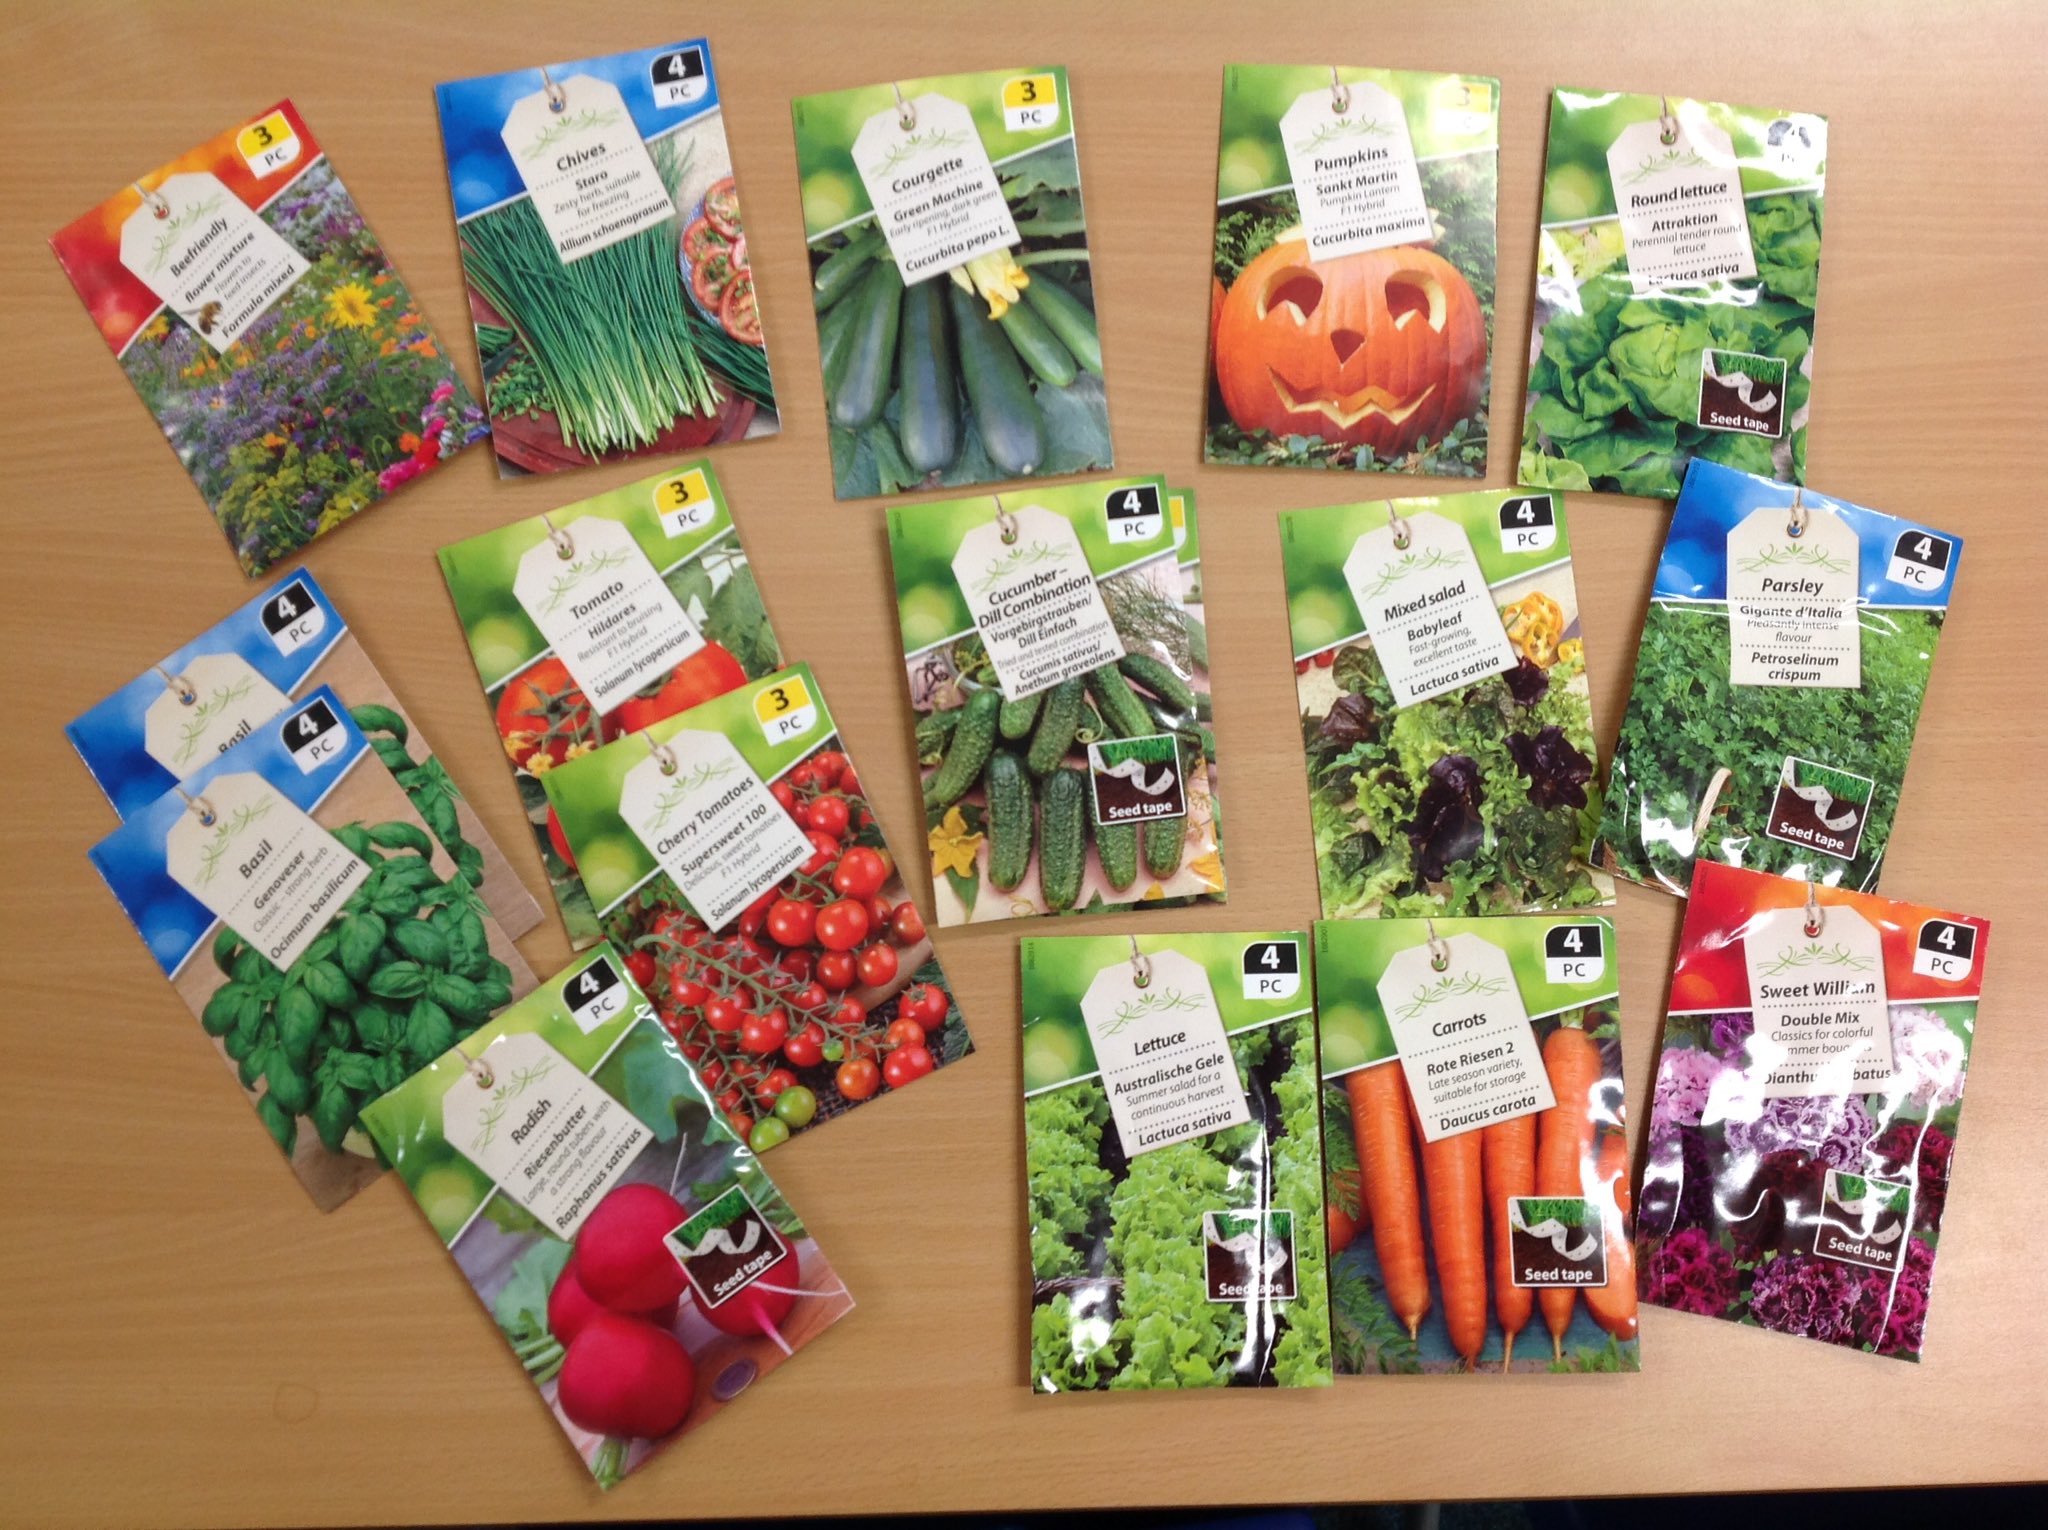 Orthodox pastel Uitstekend Twitter 上的Lostock Gralam C of E："Thank you Lidl, Northwich for donating  these lovely seeds for our school garden #LGCE https://t.co/hEvdIS5pzE" /  Twitter